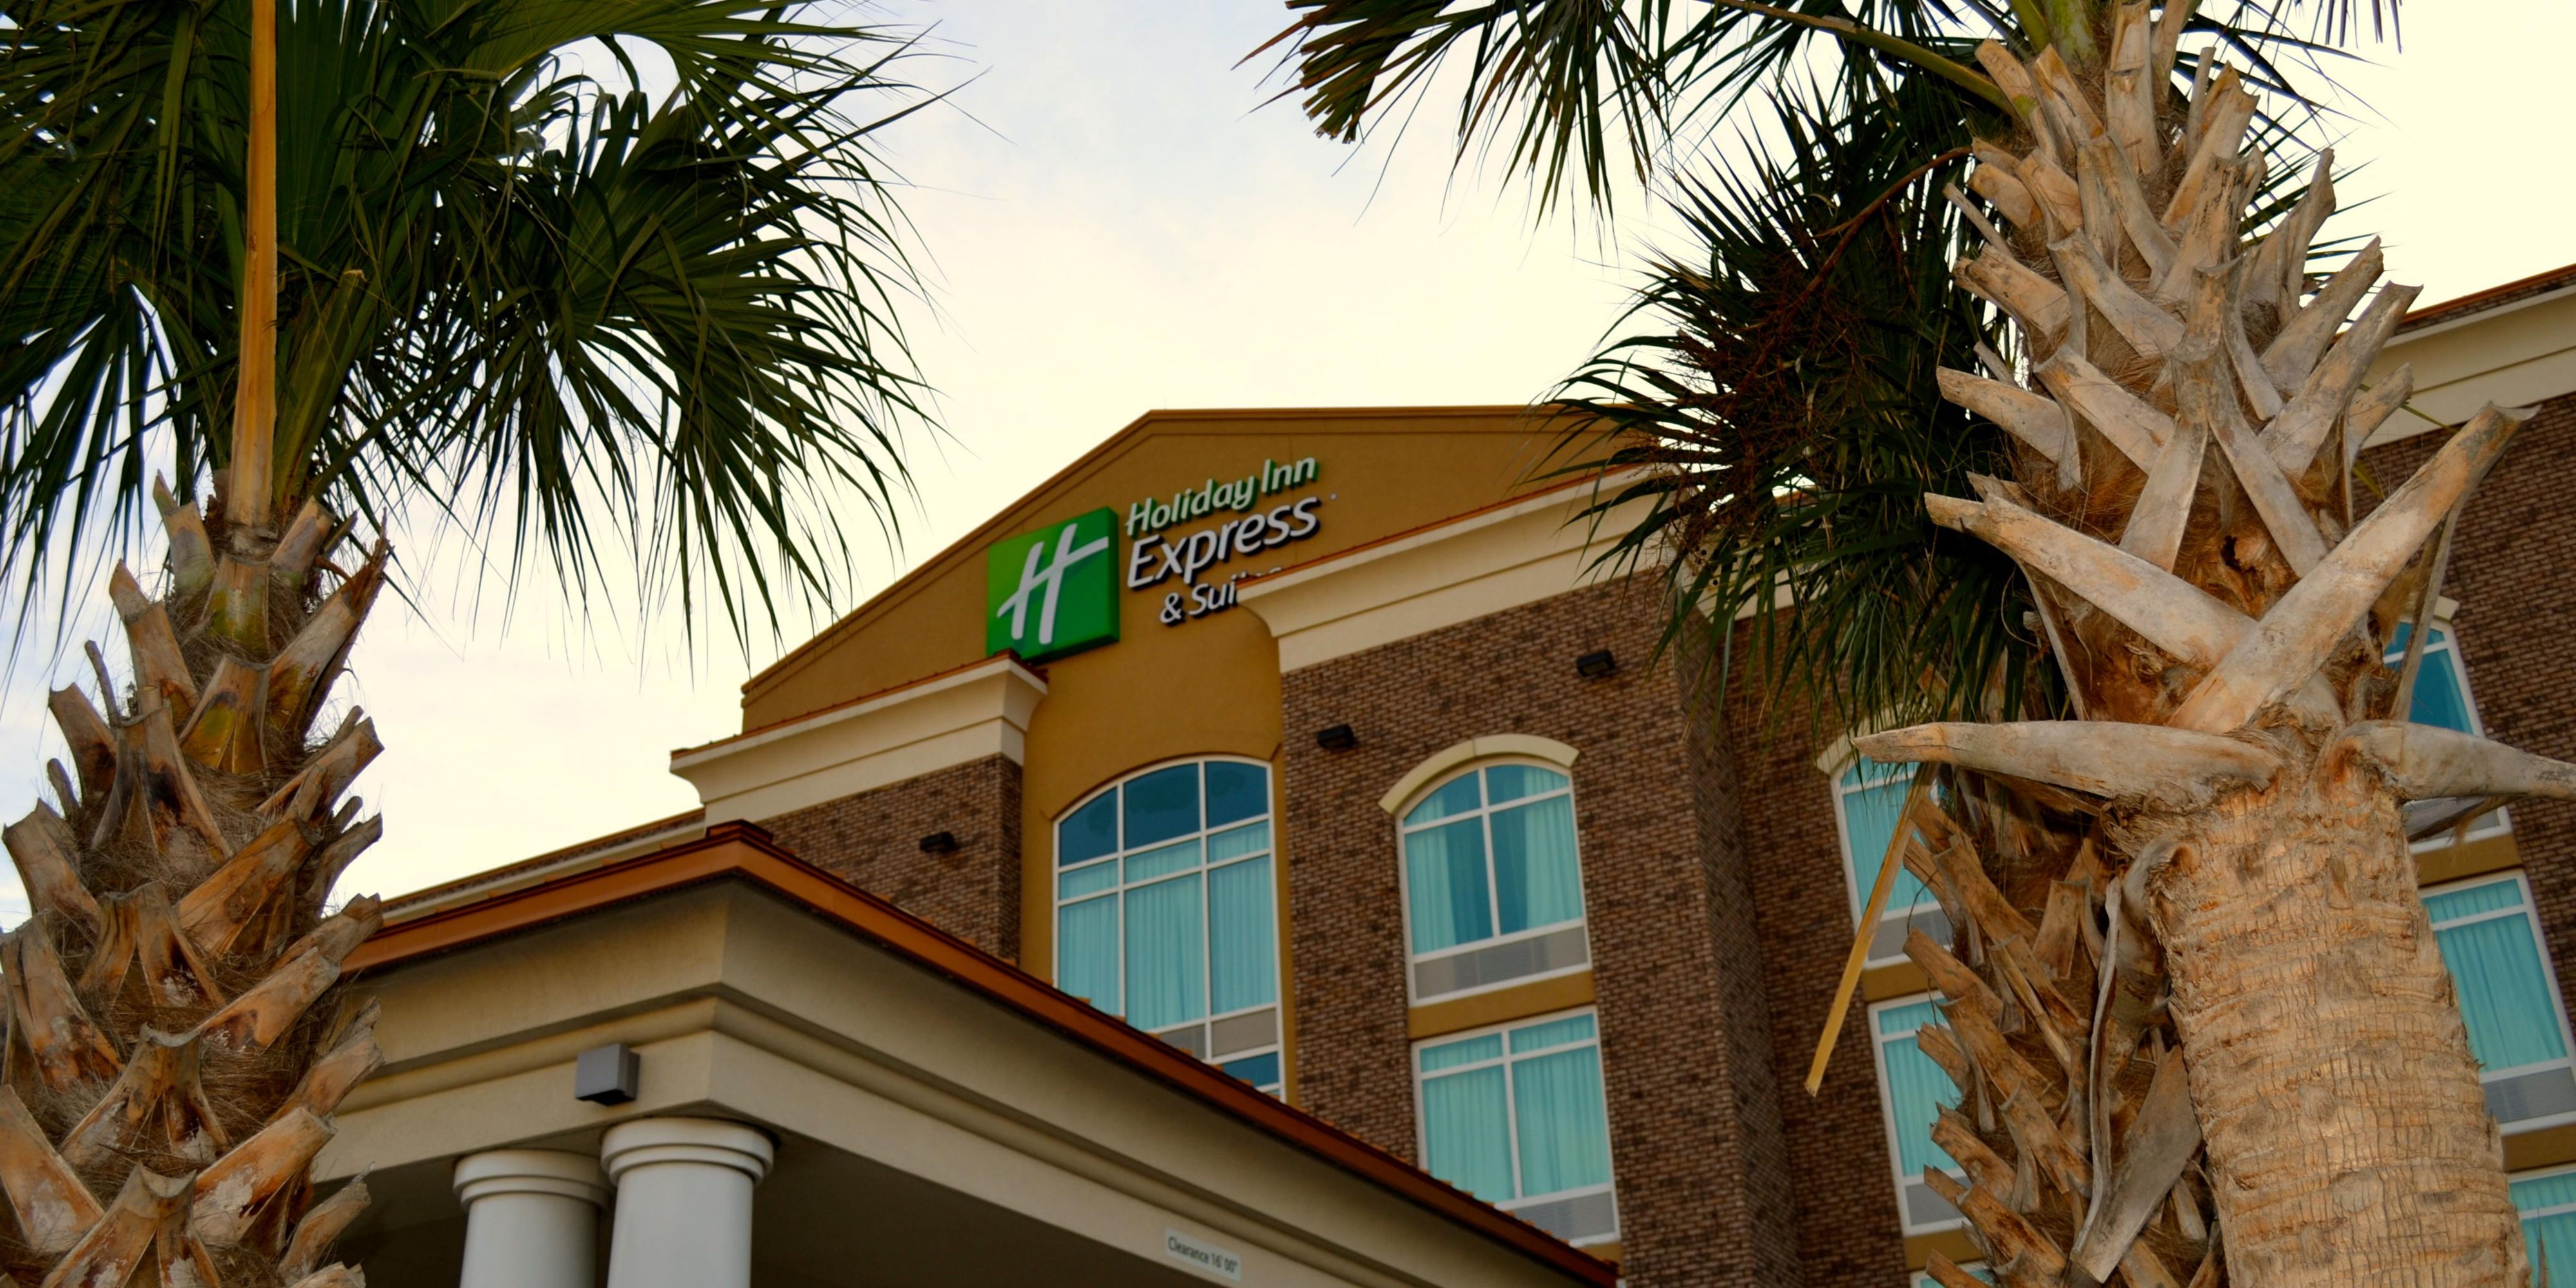 Our complimentary hotel shuttle service provides transportation within a 5 mile radius of the hotel, including the Charleston International Airport, Tanger Outlets, and The North Charleston Coliseum, Performing Arts Center, and Charleston Area Convention Center. Simply contact the front desk at 843-554-2100 to learn more or schedule a ride.